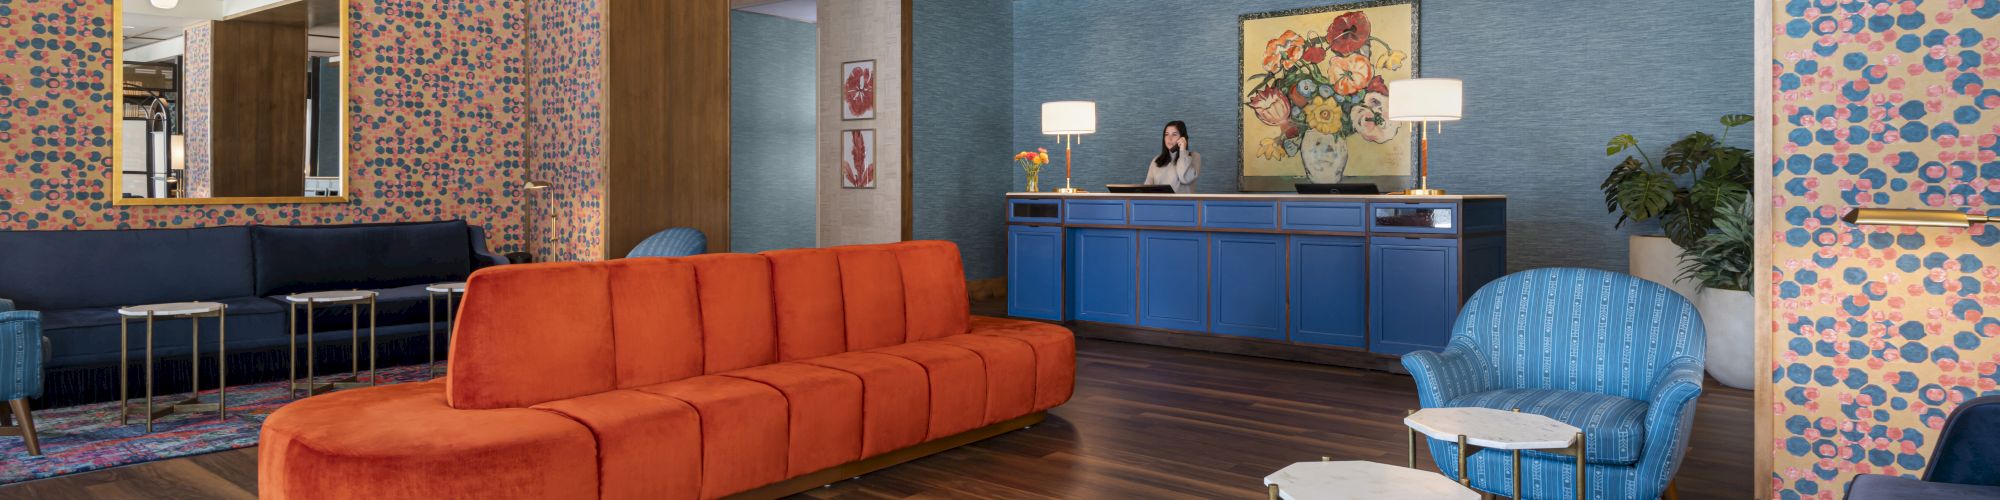 The image shows a stylish lobby with colorful furniture, including a long orange sofa, blue armchairs, small tables, and a reception desk.